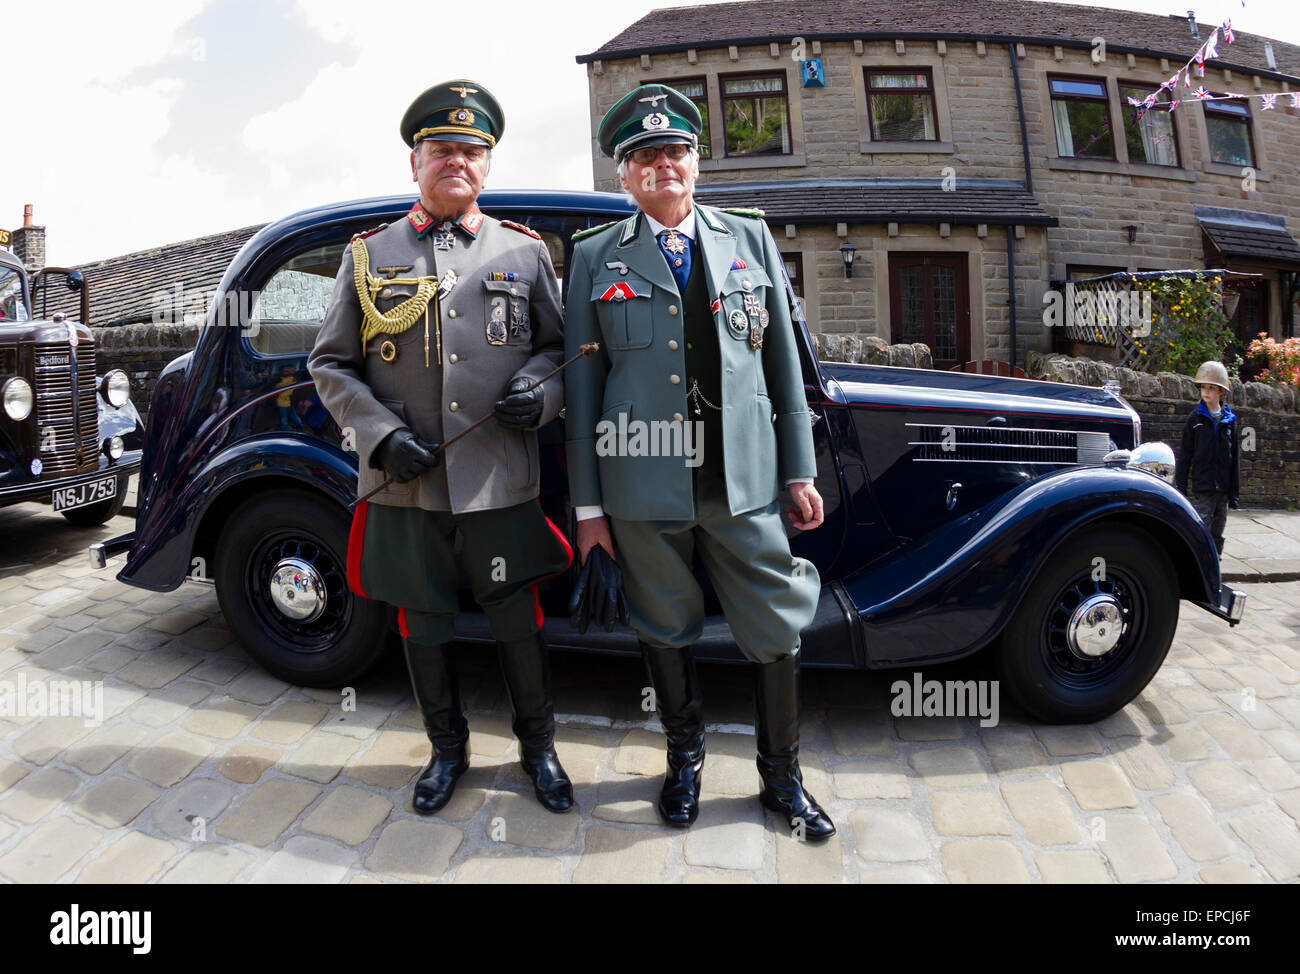 Haworth, West Yorkshire, UK. 16th May, 2015. Two men dressed in German Army uniforms at Haworth 1940s weekend, an annual event in which people dress in period costume and visit the village of Haworth to relive the 1940s. After complaints in previous years, the organisers have requested that people don't wear German Uniforms. Credit:  West Yorkshire Images/Alamy Live News Stock Photo